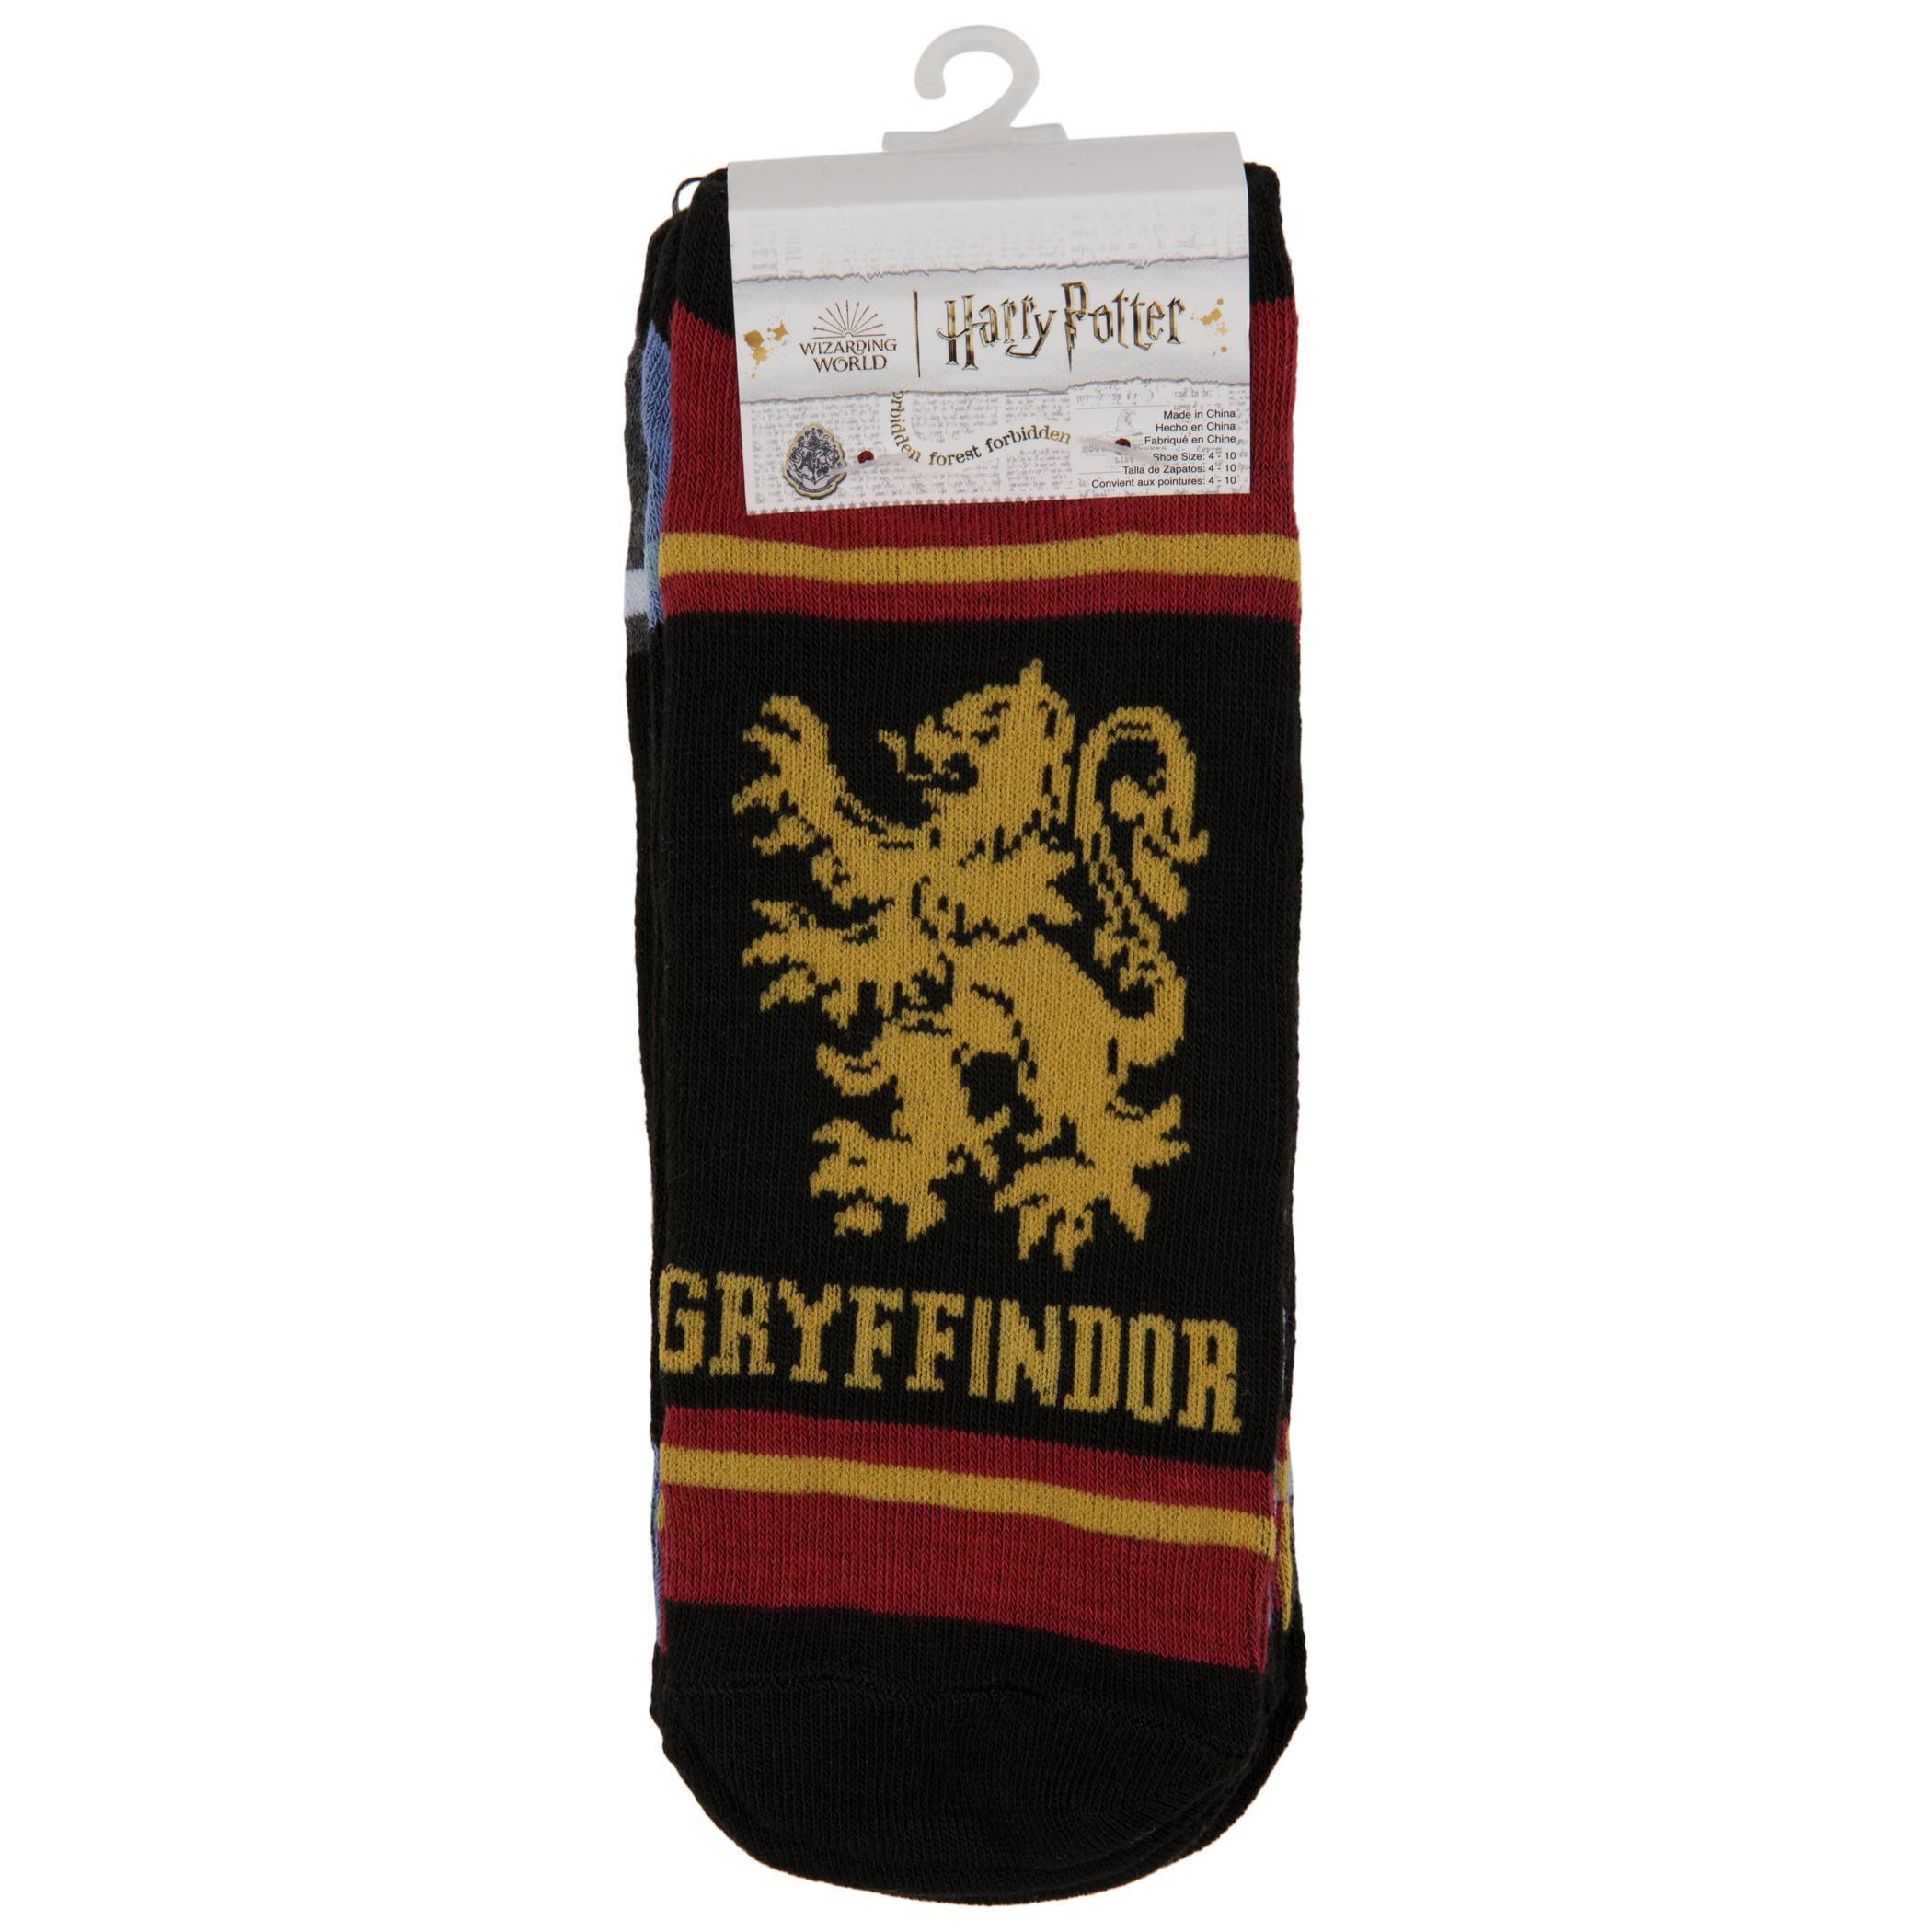 Harry Potter Icons Women's 6-Pair Pack of Low Cut Socks